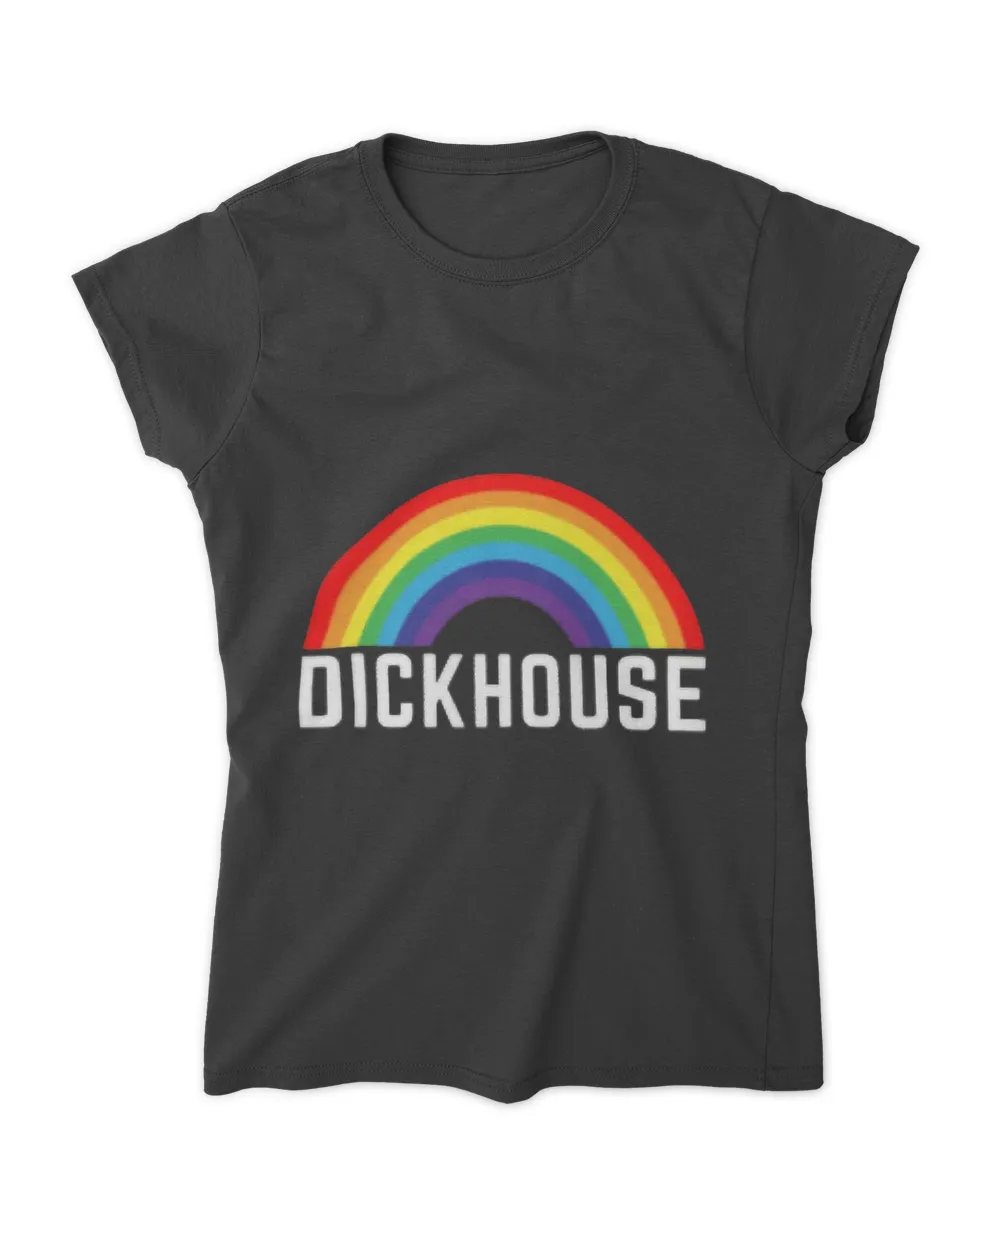 Dickhouse Productions - Deckhouse Johnny Knoxville Essential T-Shirt